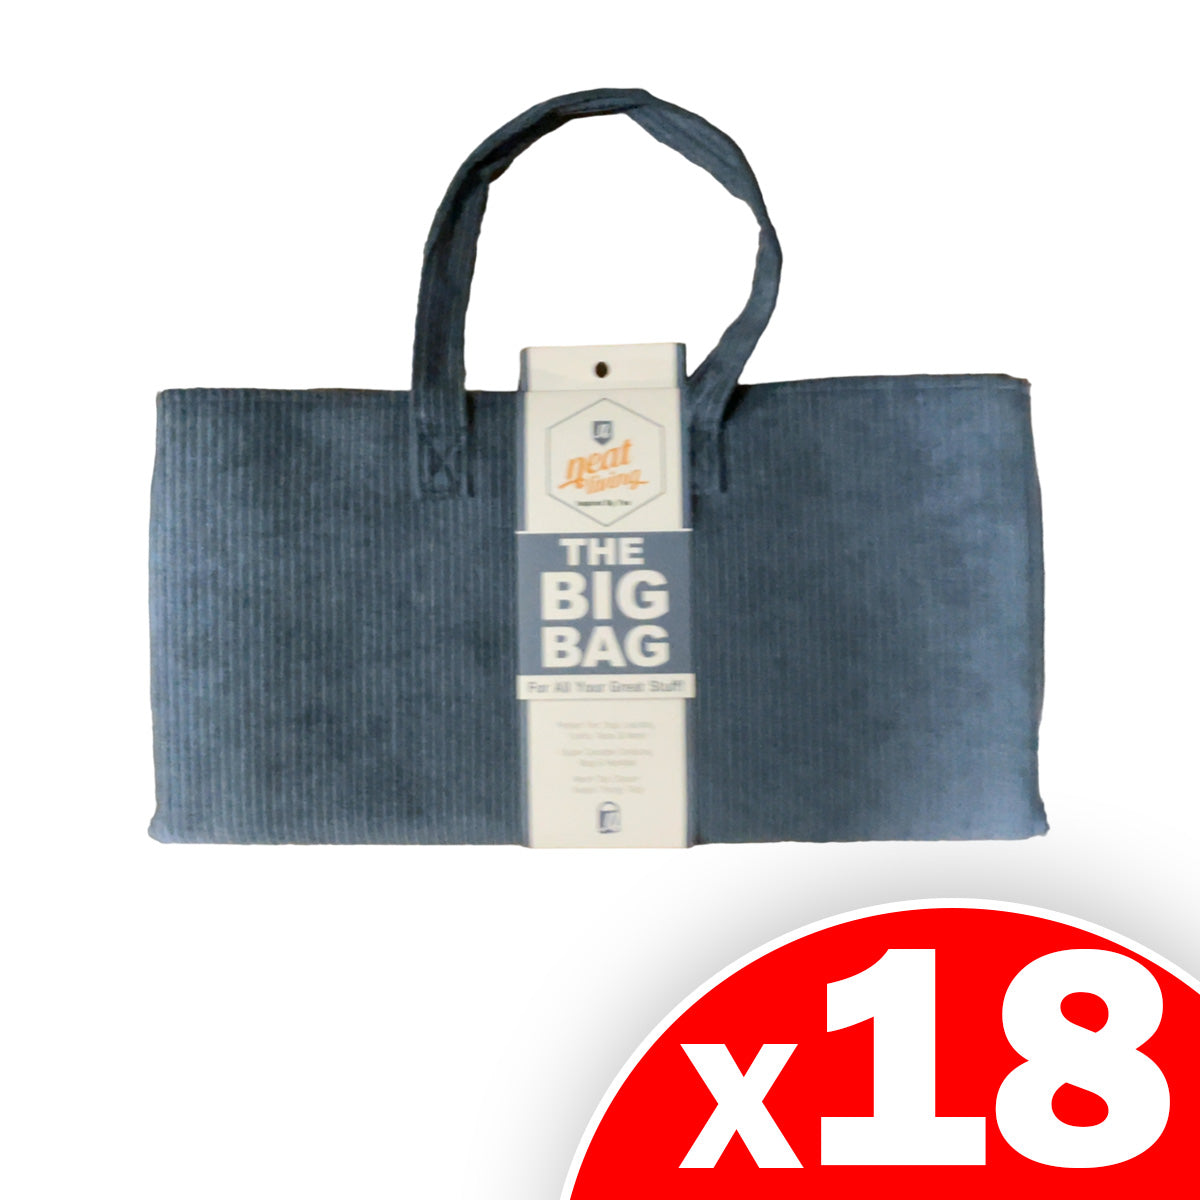 The Big Bag, Utility Bag, Lug in Style! 18 Pack